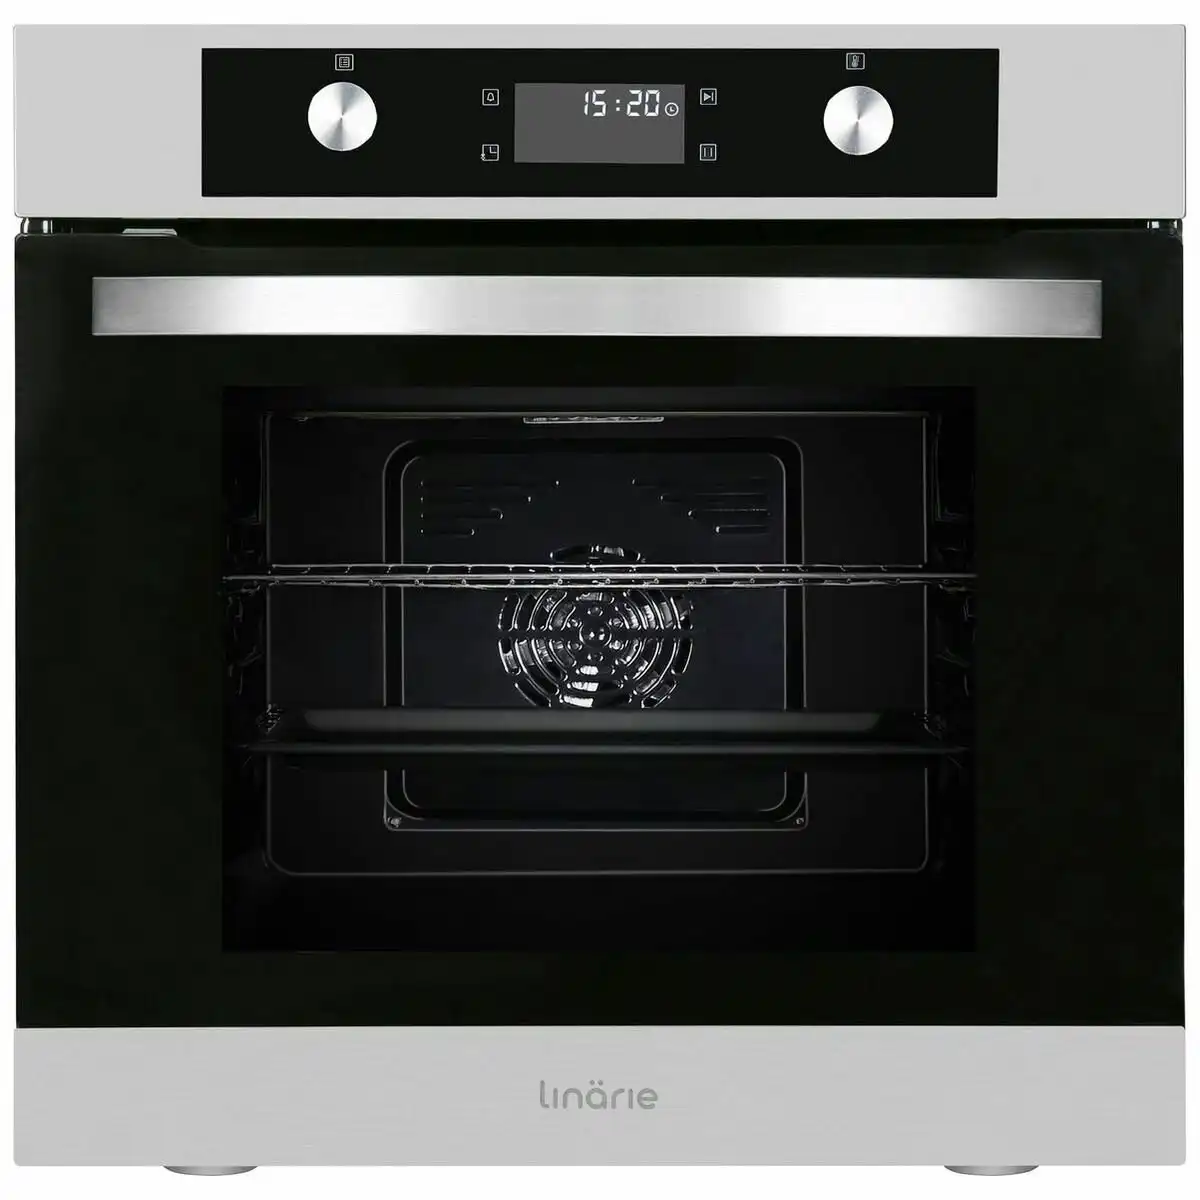 Linarie 60cm Pyrolytic Electric Built-in Oven